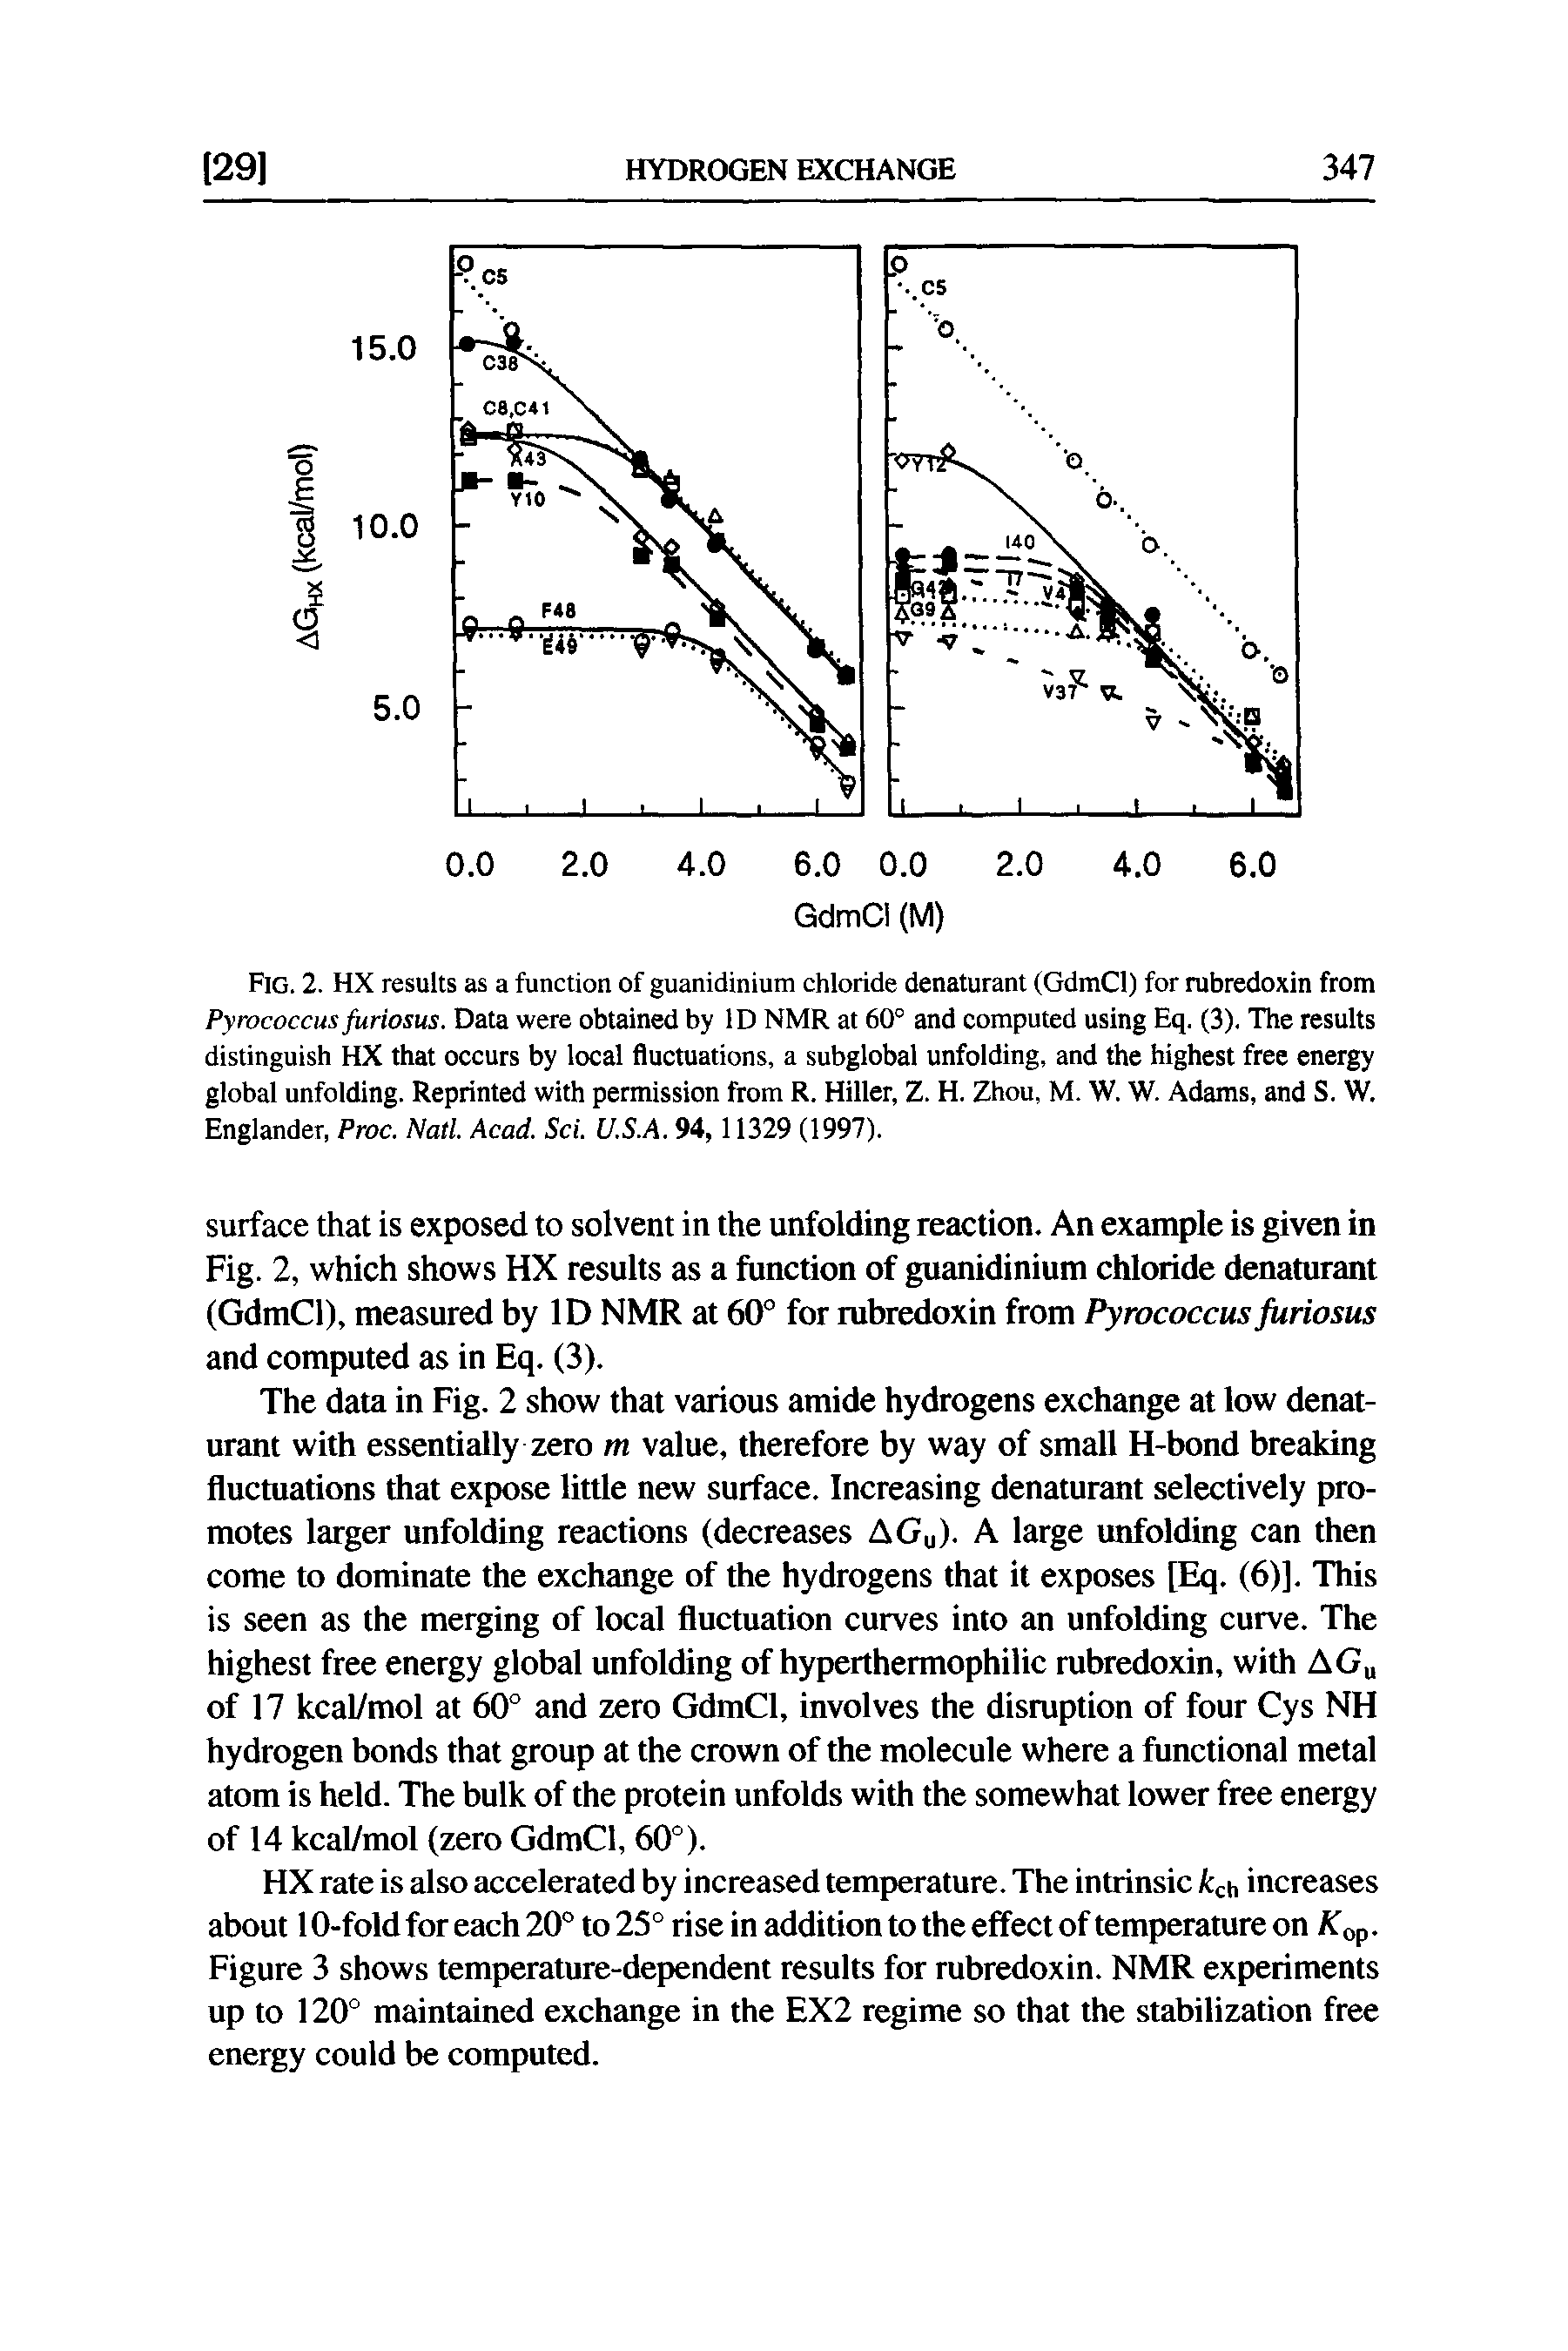 Fig. 2. HX results as a function of guanidinium chloride denaturant (GdmCl) for rubredoxin from Pyrococcus furiosus. Data were obtained by ID NMR at 60° and computed using Eq. (3). The results distinguish HX that occurs by local fluctuations, a subglobal unfolding, and the highest free energy global unfolding. Reprinted with permission from R. Hiller, Z. H. Zhou, M. W. W. Adams, and S. W. Englander, Proc. Natl Acad. Sci. U.S.A. 94,11329 (1997).